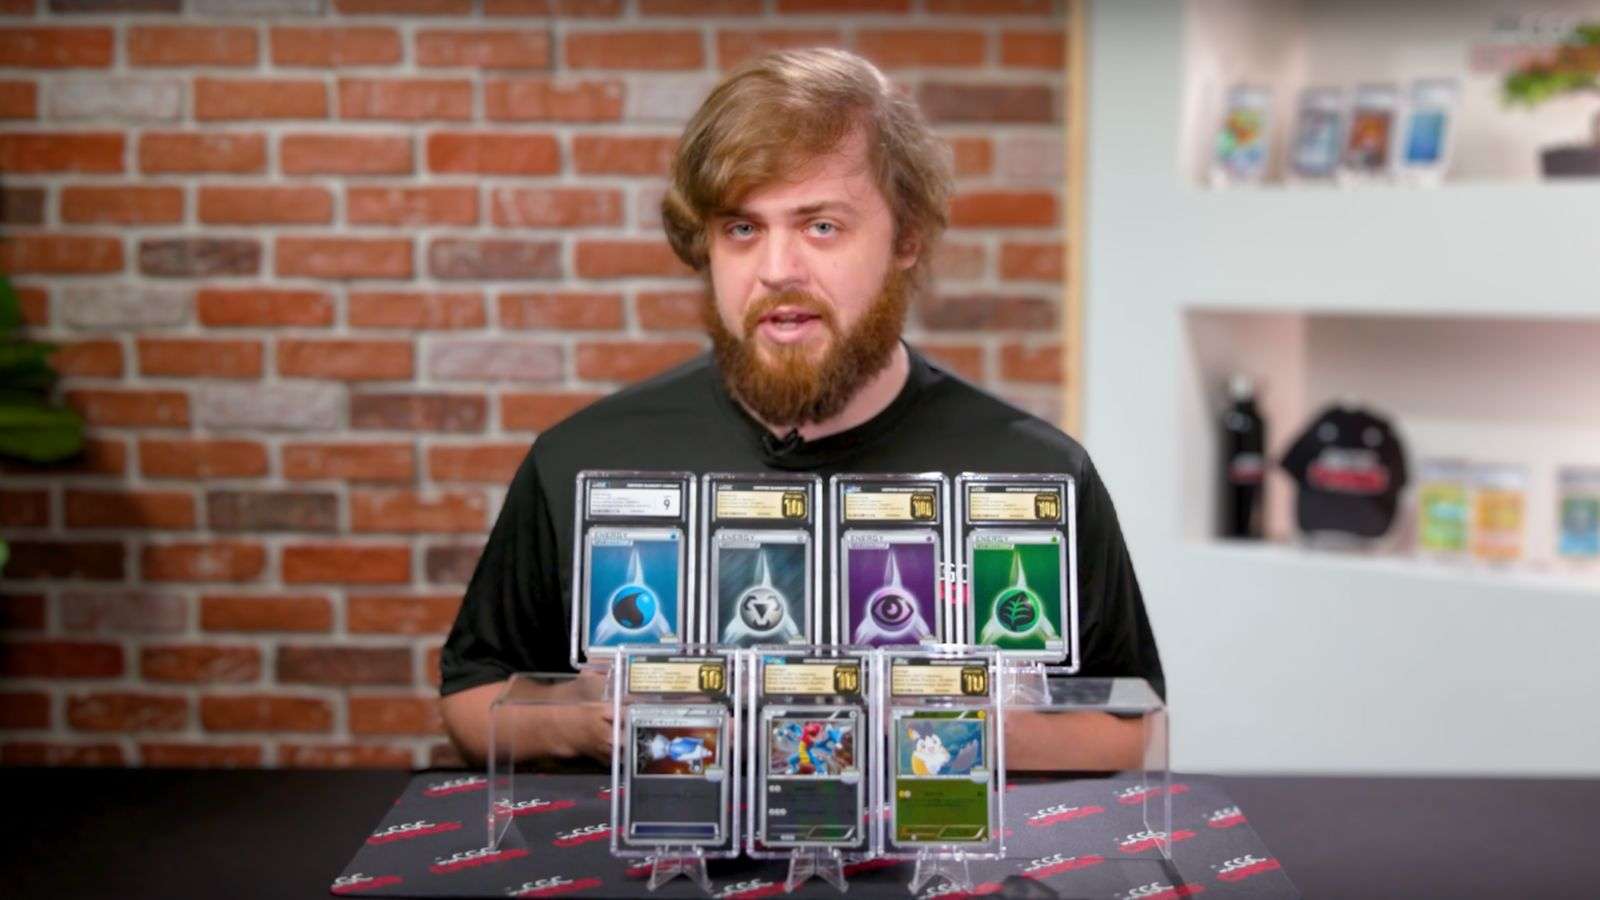 Kevin Murphy of CGC standing over a set of previously unreleased, pristine graded Pokemon cards from the 2011 Japanese World Qualifiers, including Japanese Emolga, Druddigon, Pokemon Catcher, Grass, Water, Psychic and Metal energy Pokemon and Trainer cards.